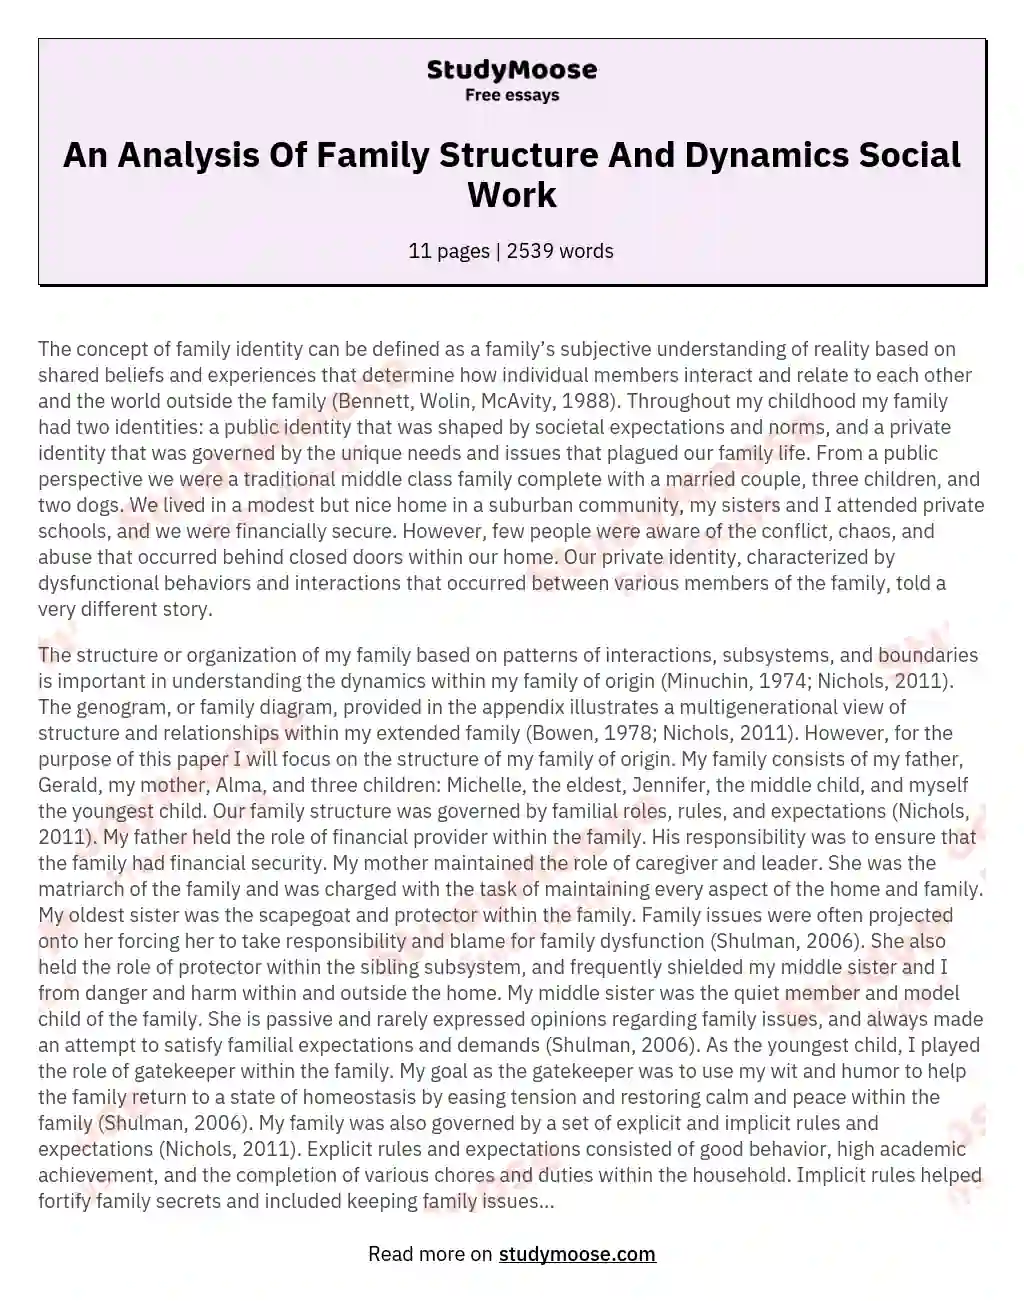 An Analysis Of Family Structure And Dynamics Social Work essay